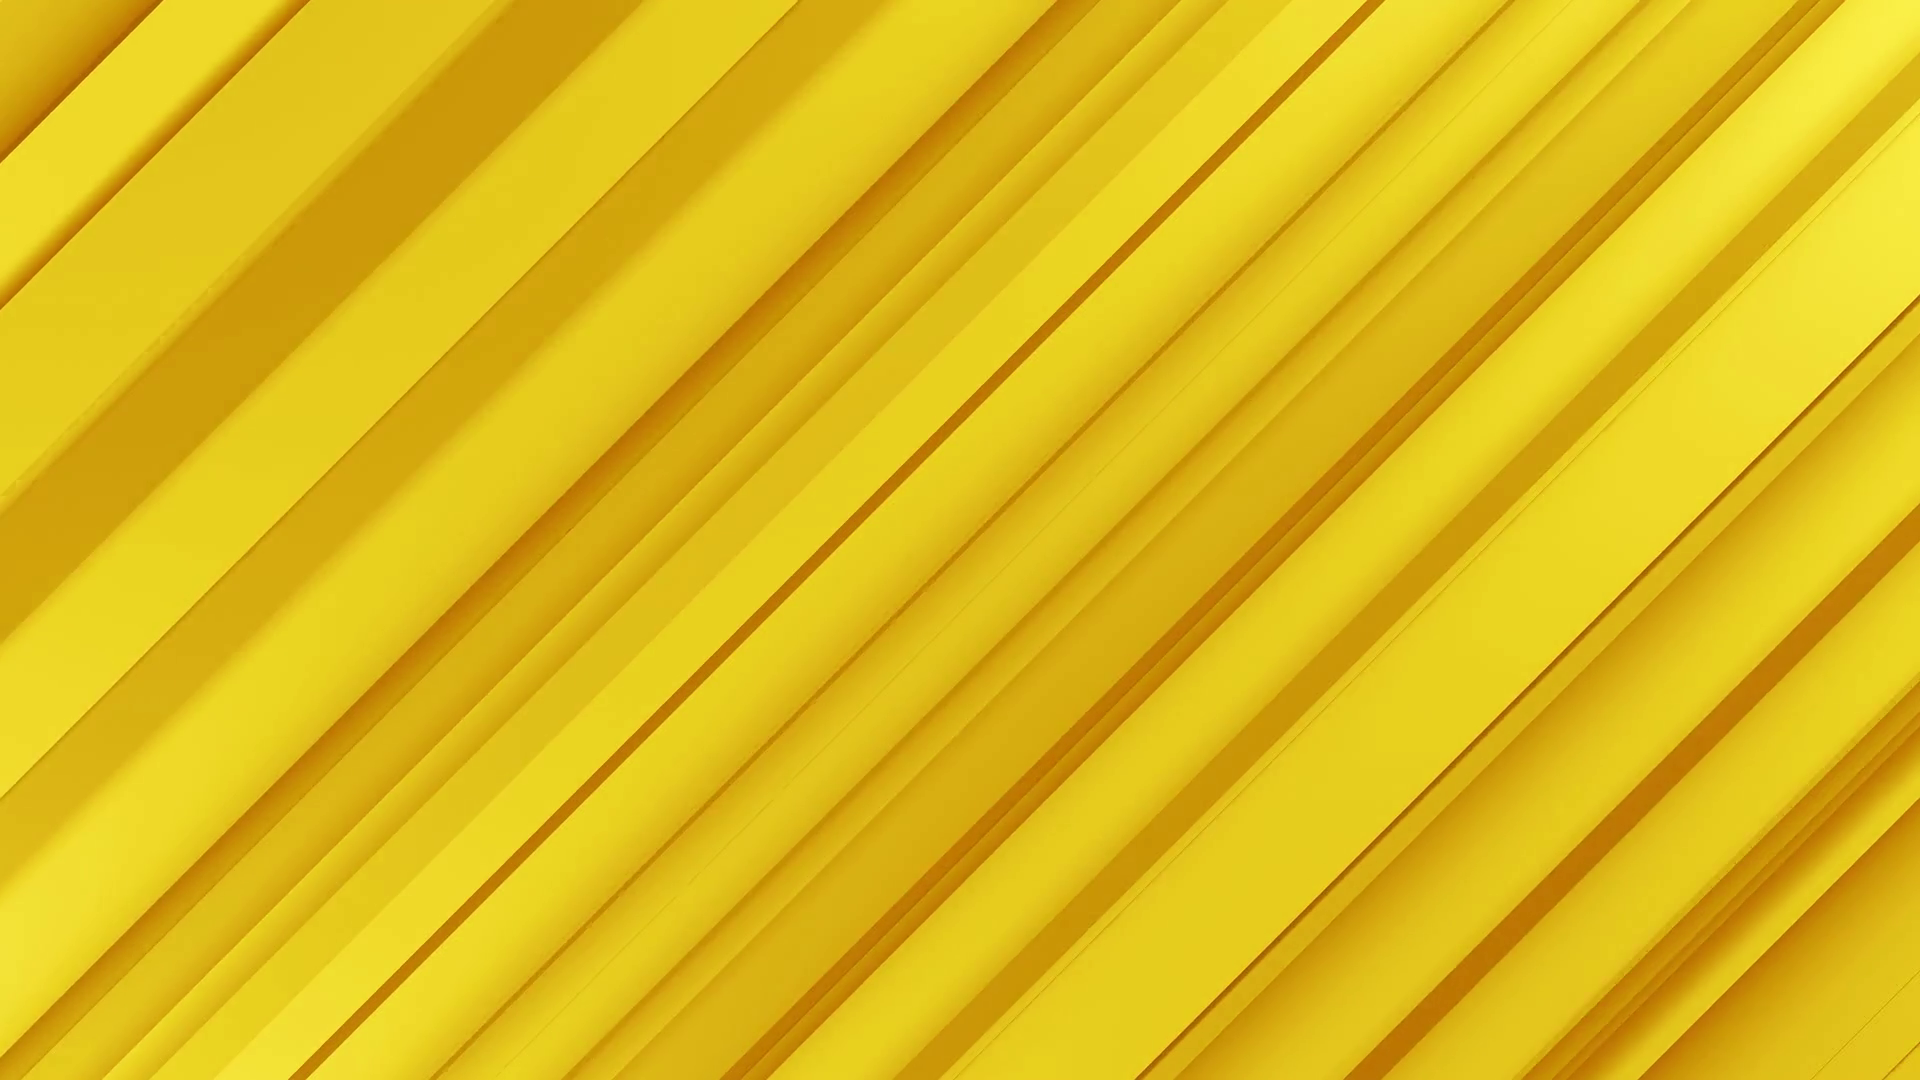 Yellow Lines Corporate Background 5 Motion Background - Videoblocks